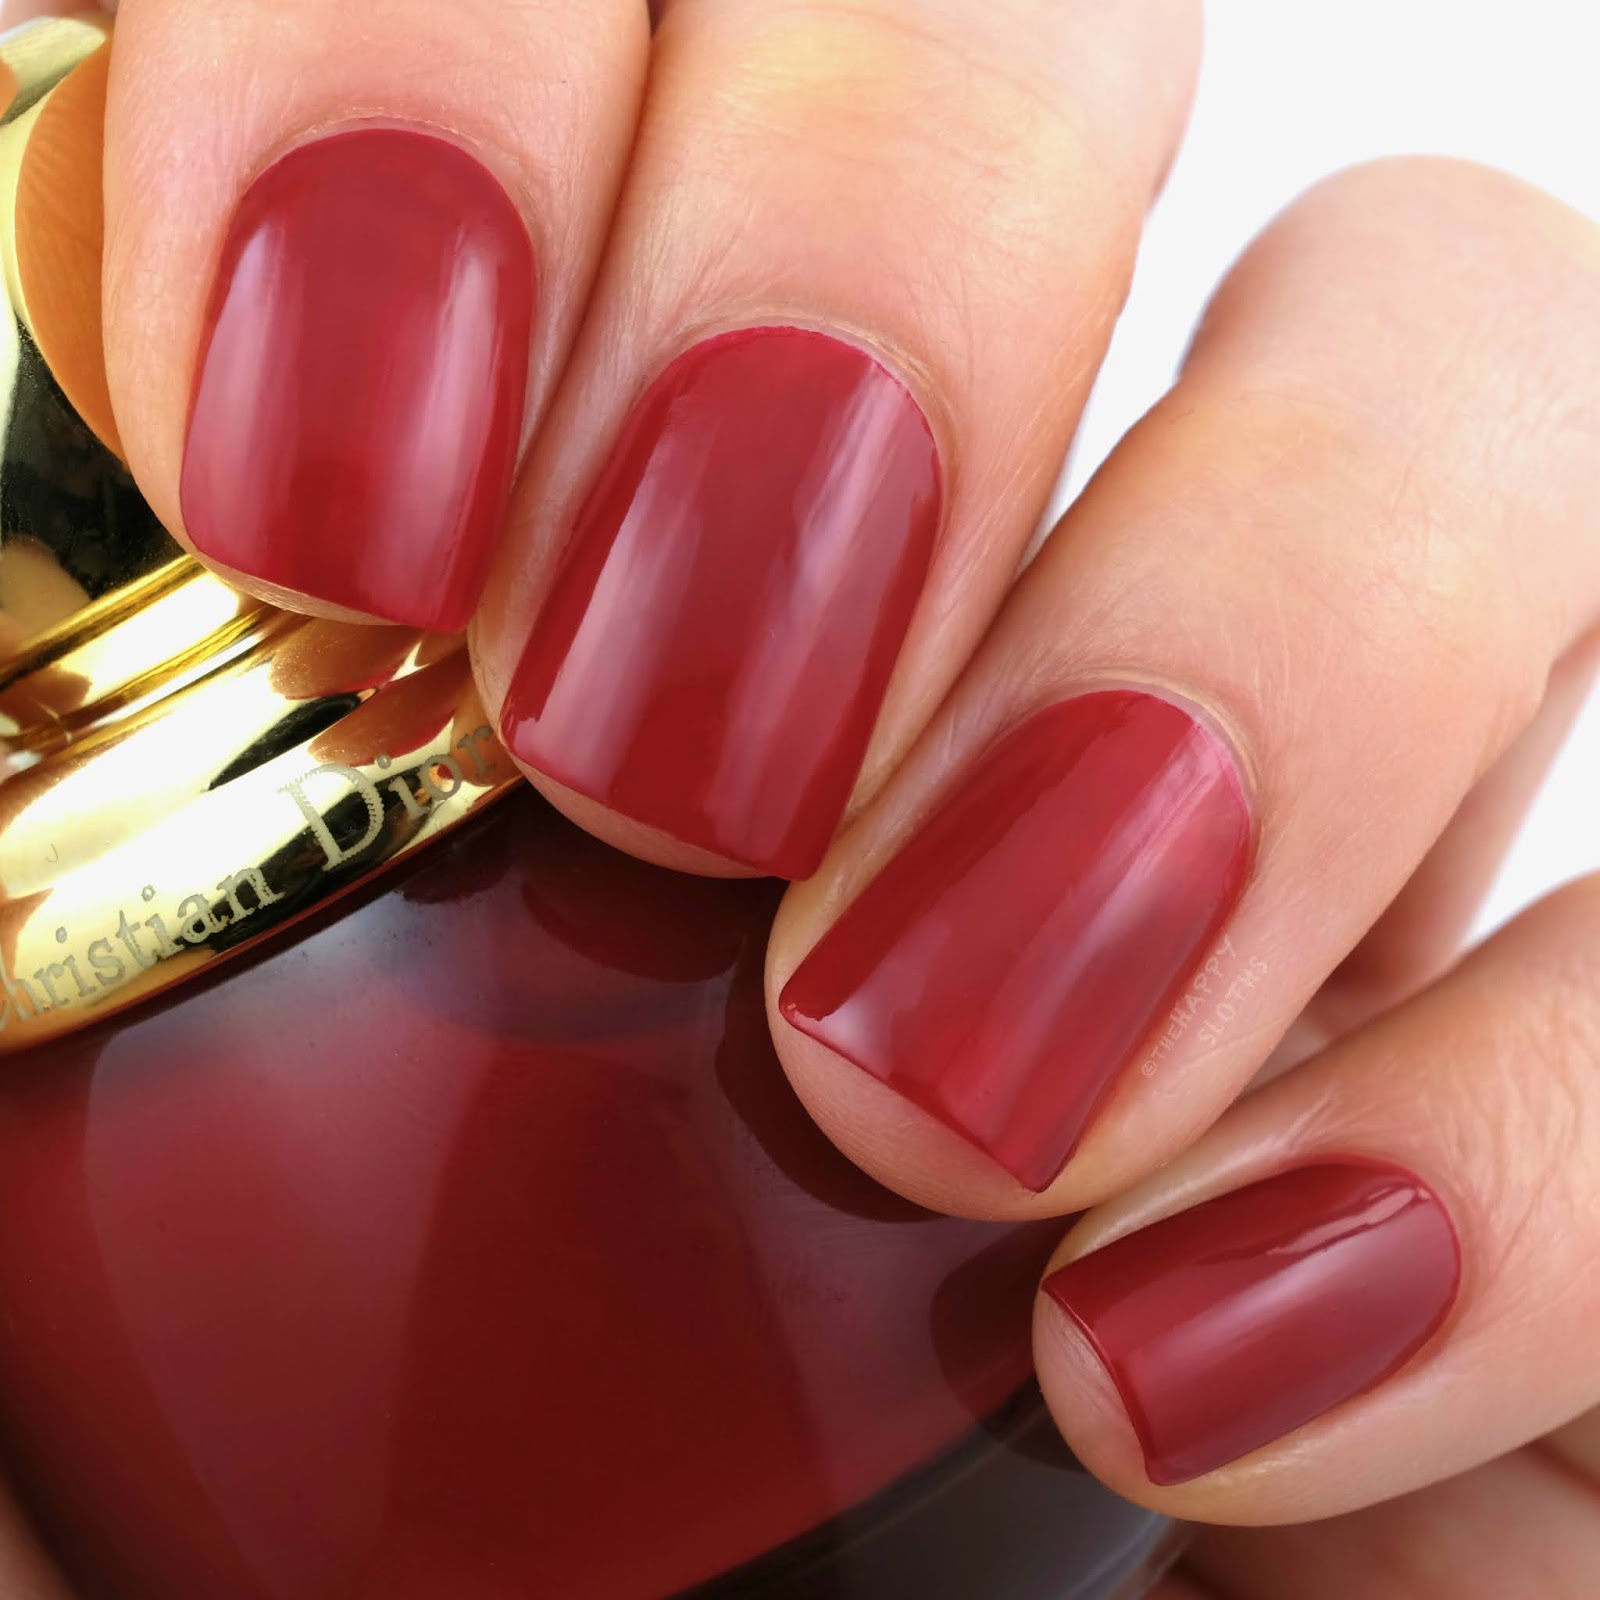 Dior Holiday 2020 | Diorific Vernis in "787 Red Wonders": Review and Swatches